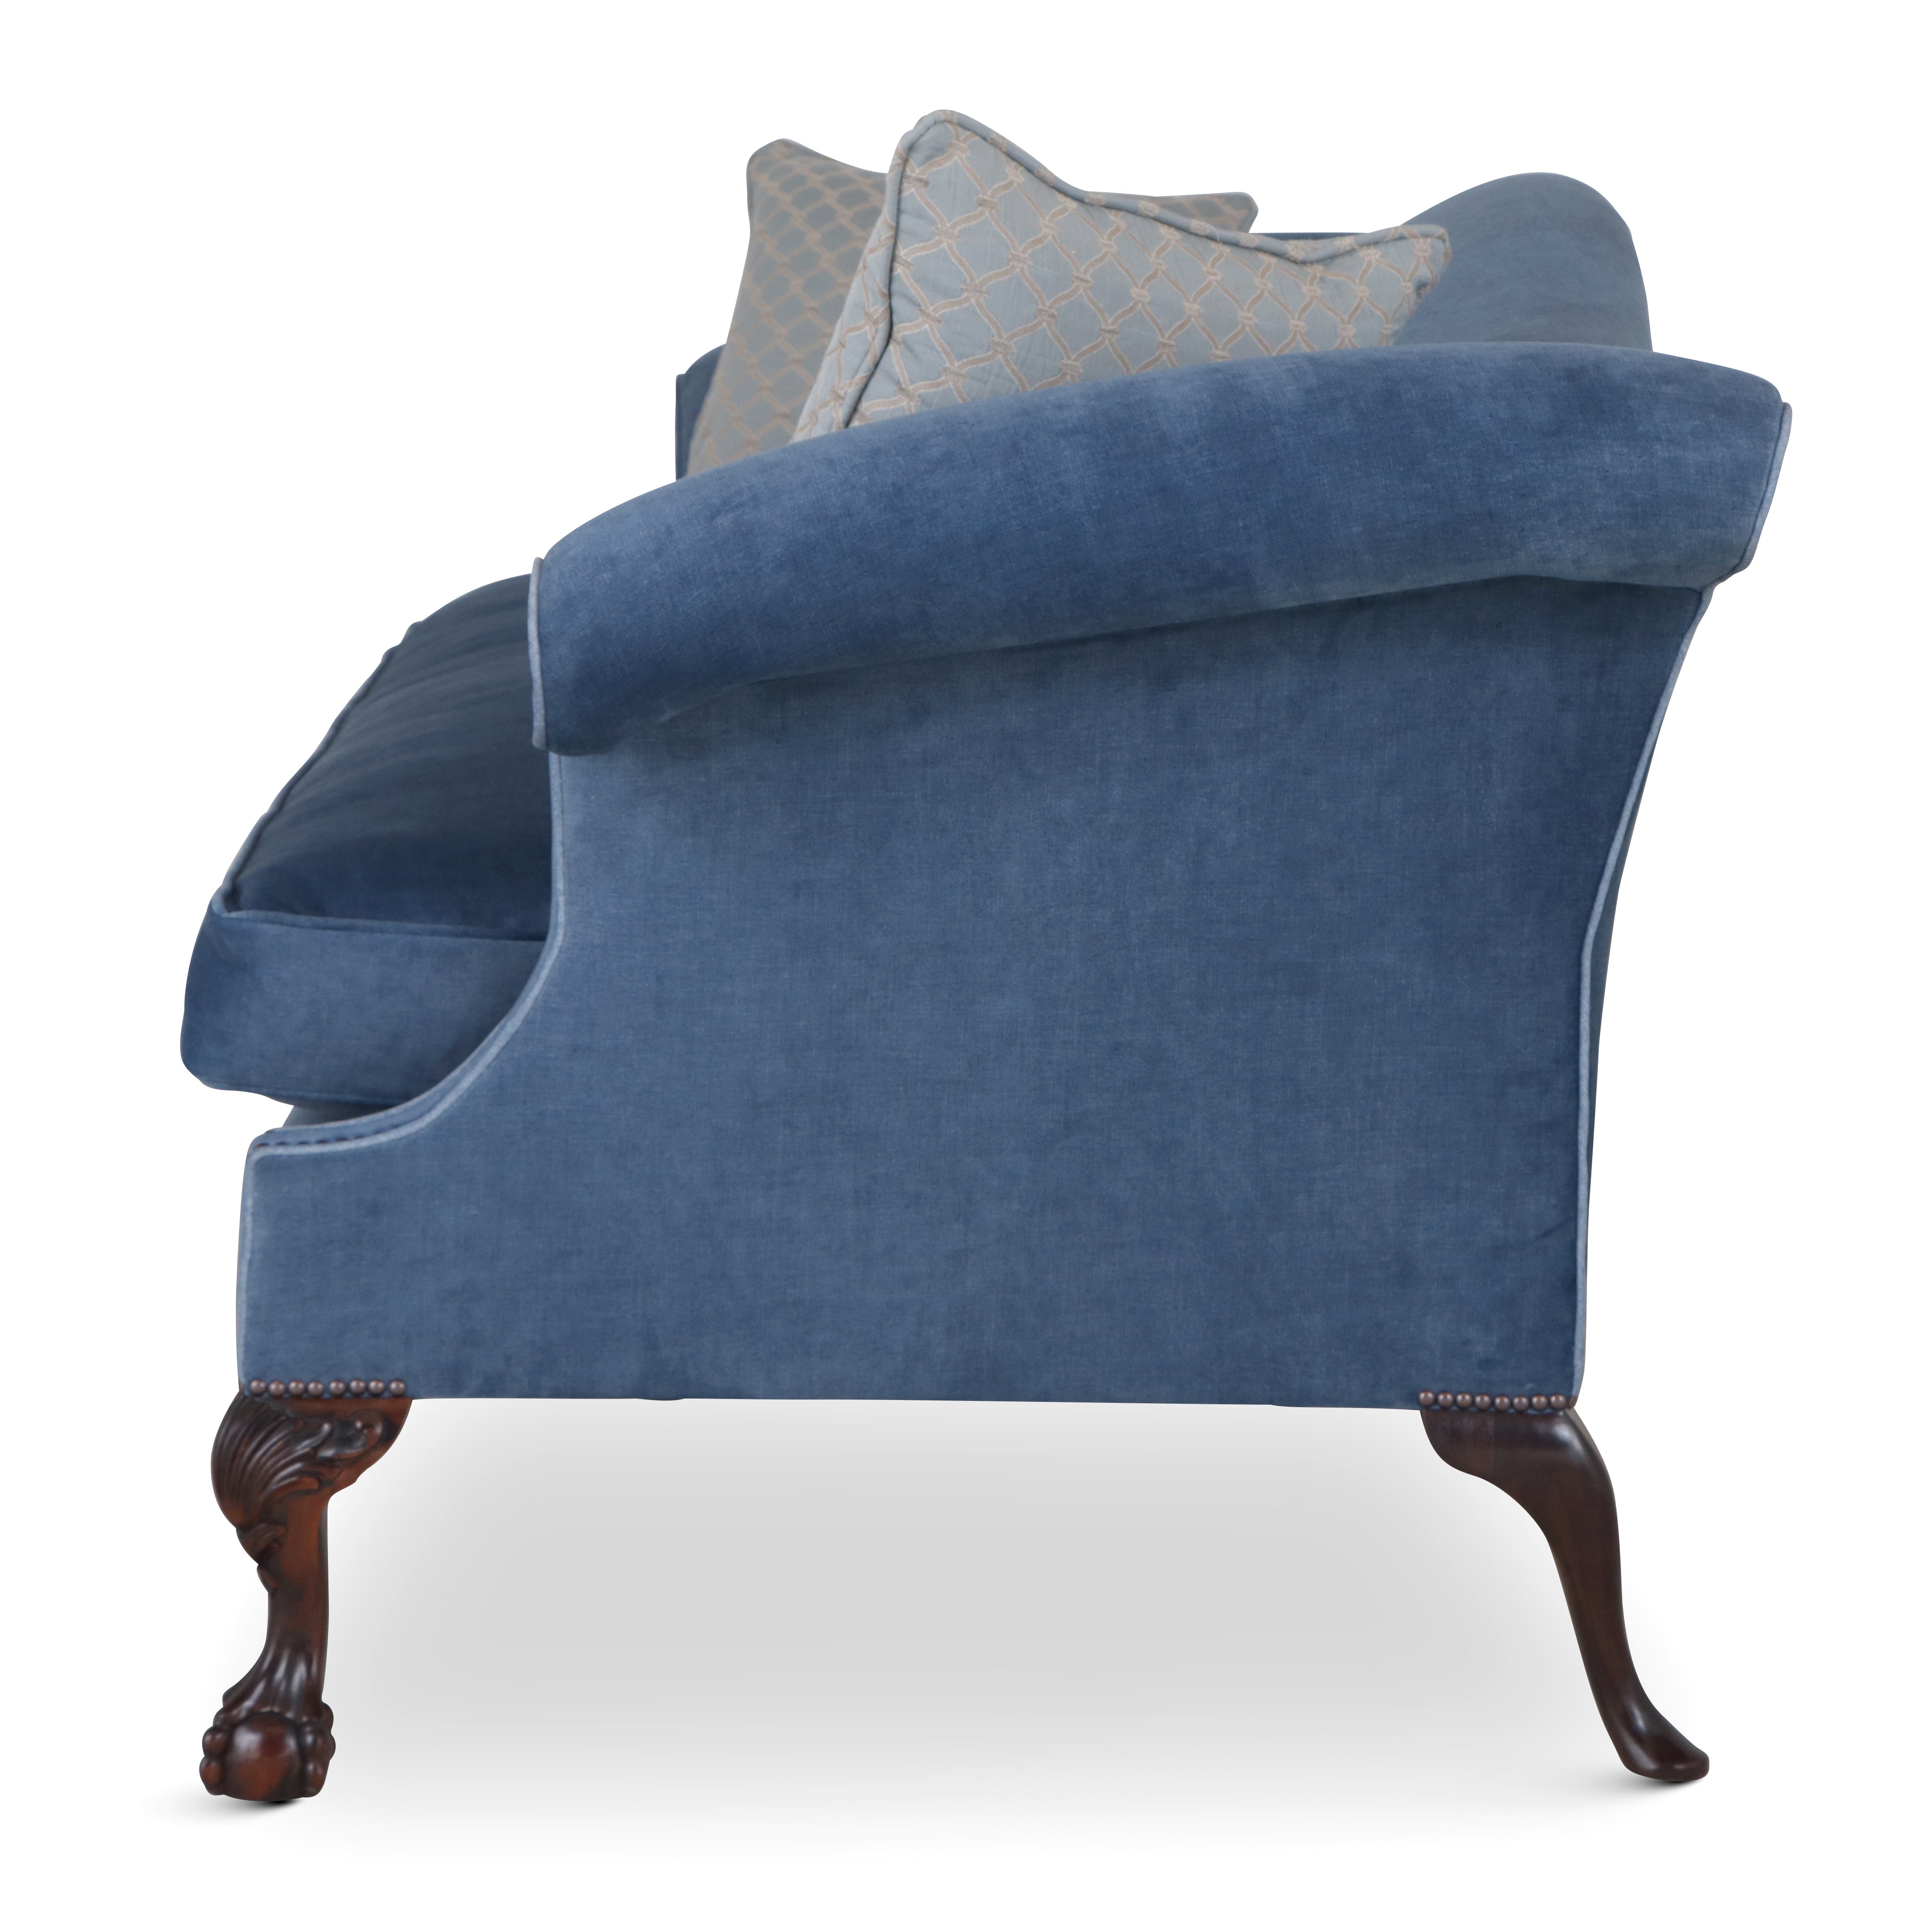 Side and arm of blue sofa